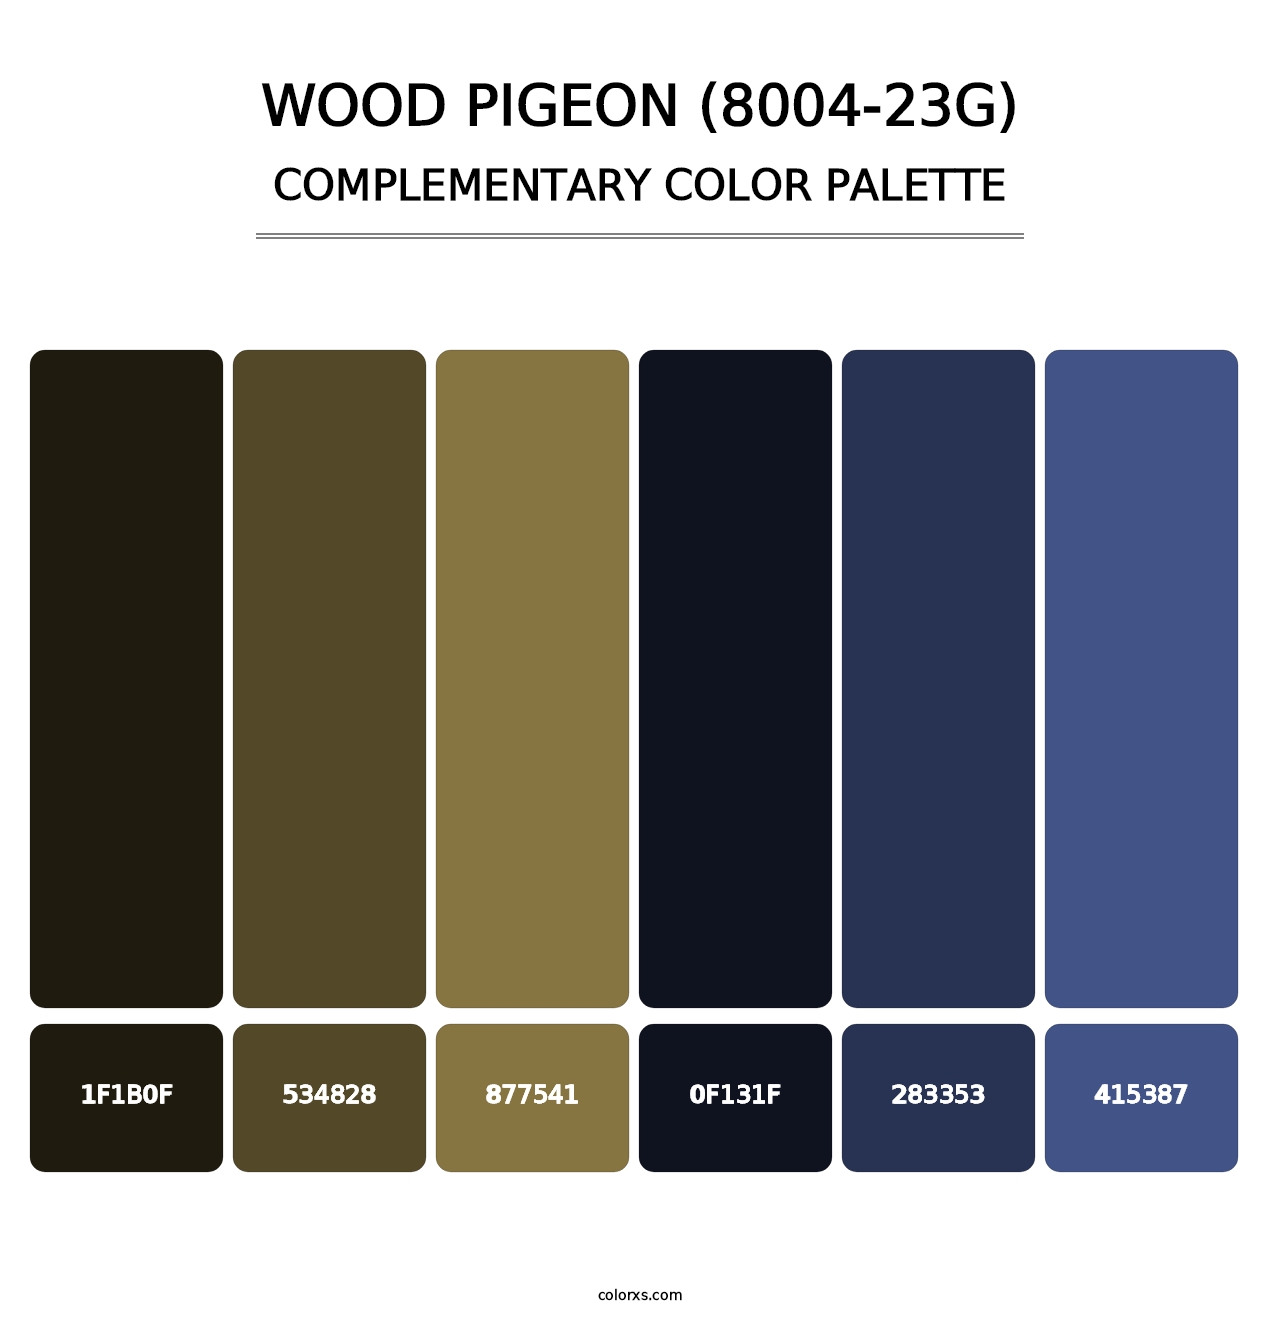 Wood Pigeon (8004-23G) - Complementary Color Palette